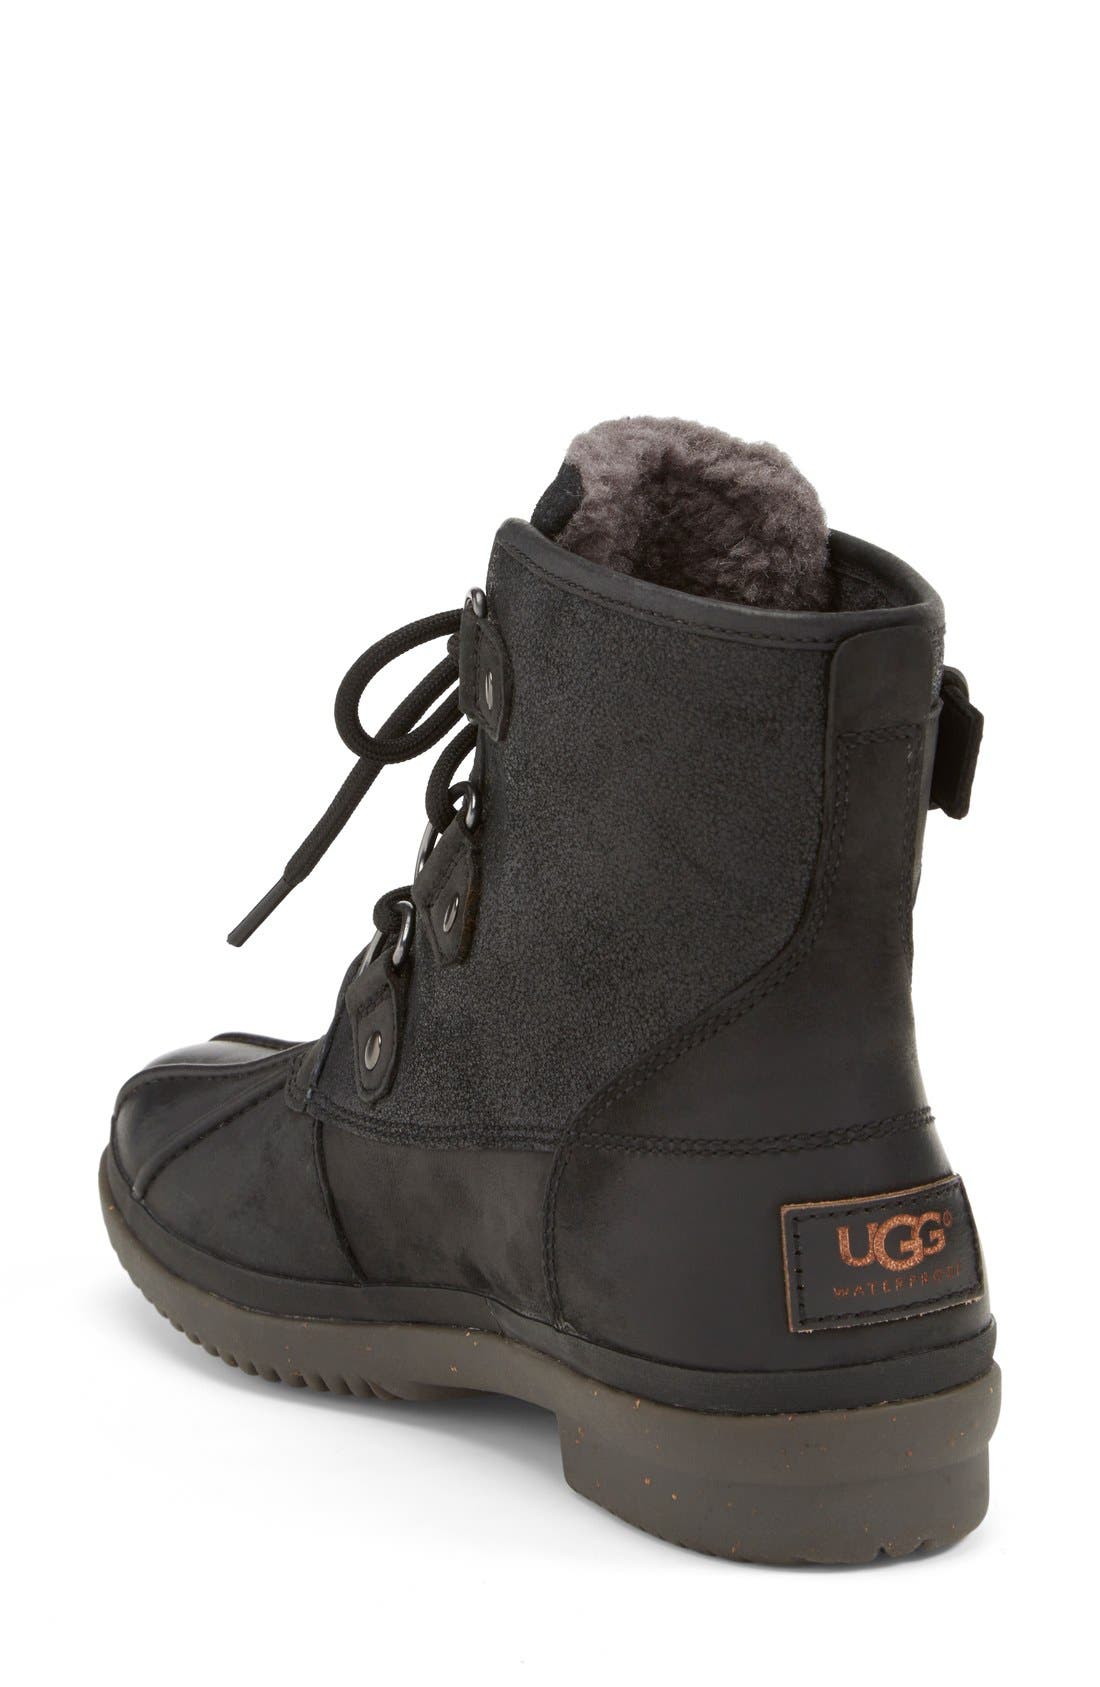 ugg women's cecile winter boot